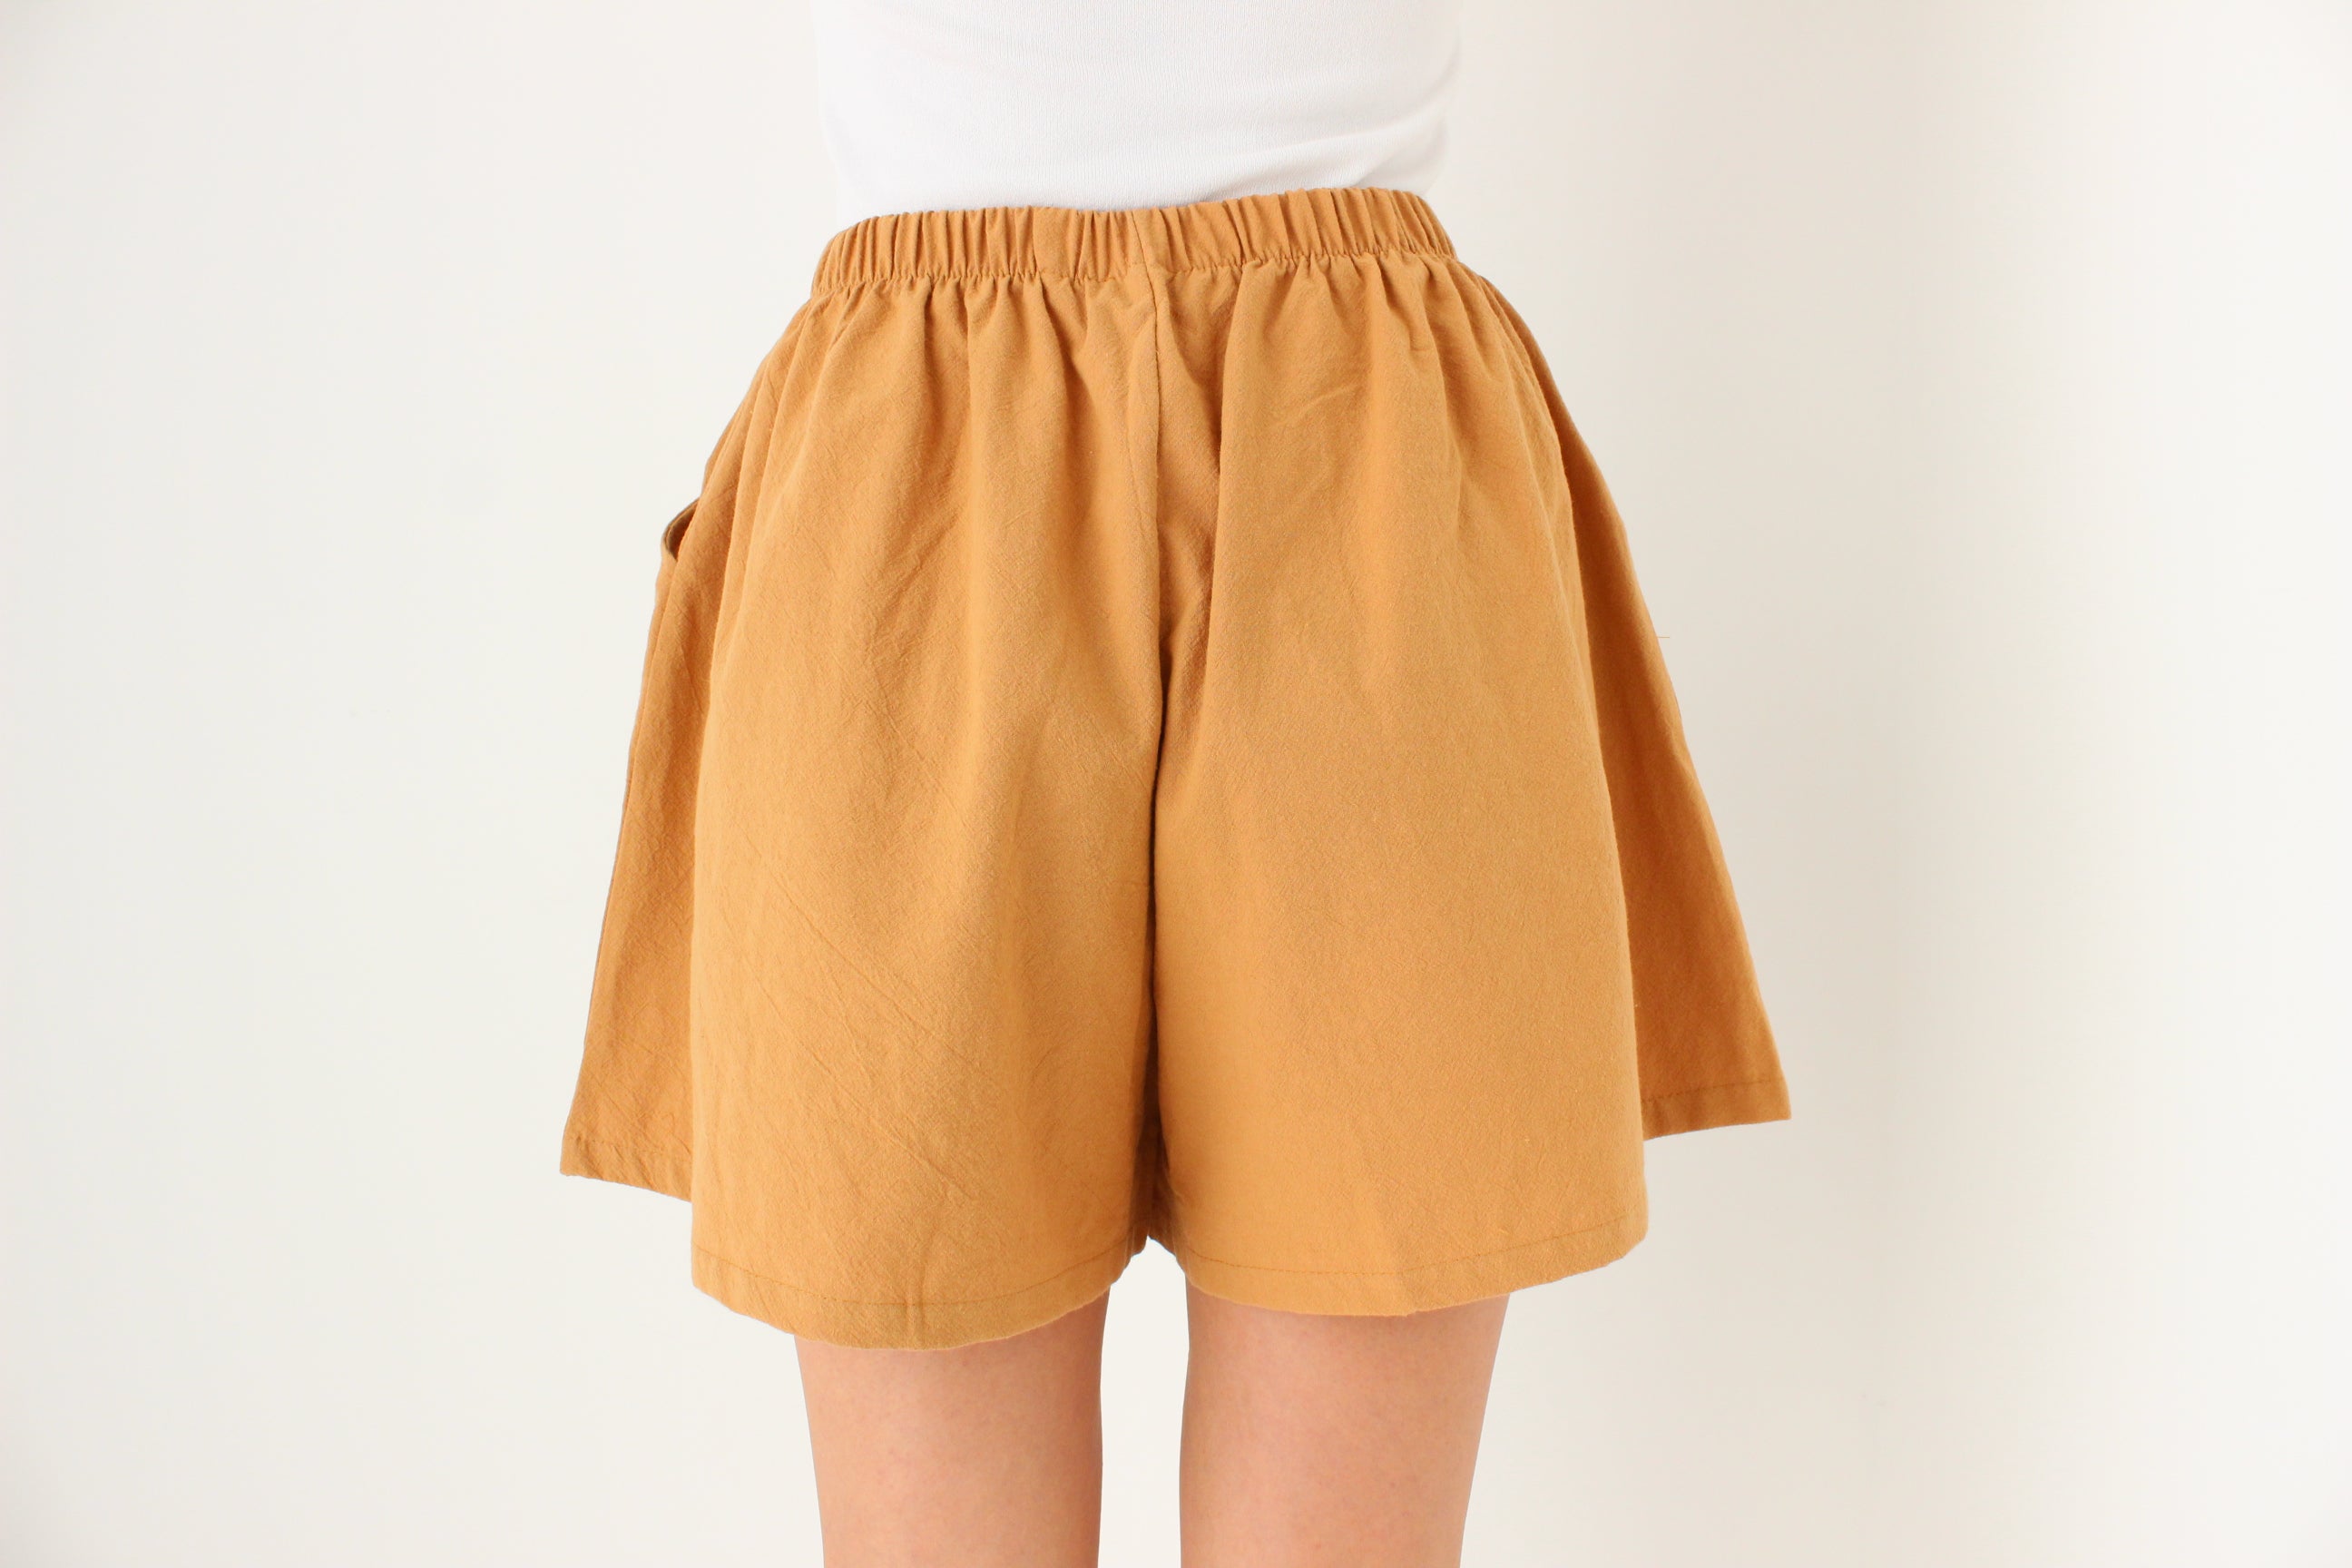 The Famous Shorts - Cotton / Linen Blend Stretch Waist Flared Leg Shorts - In Marigold